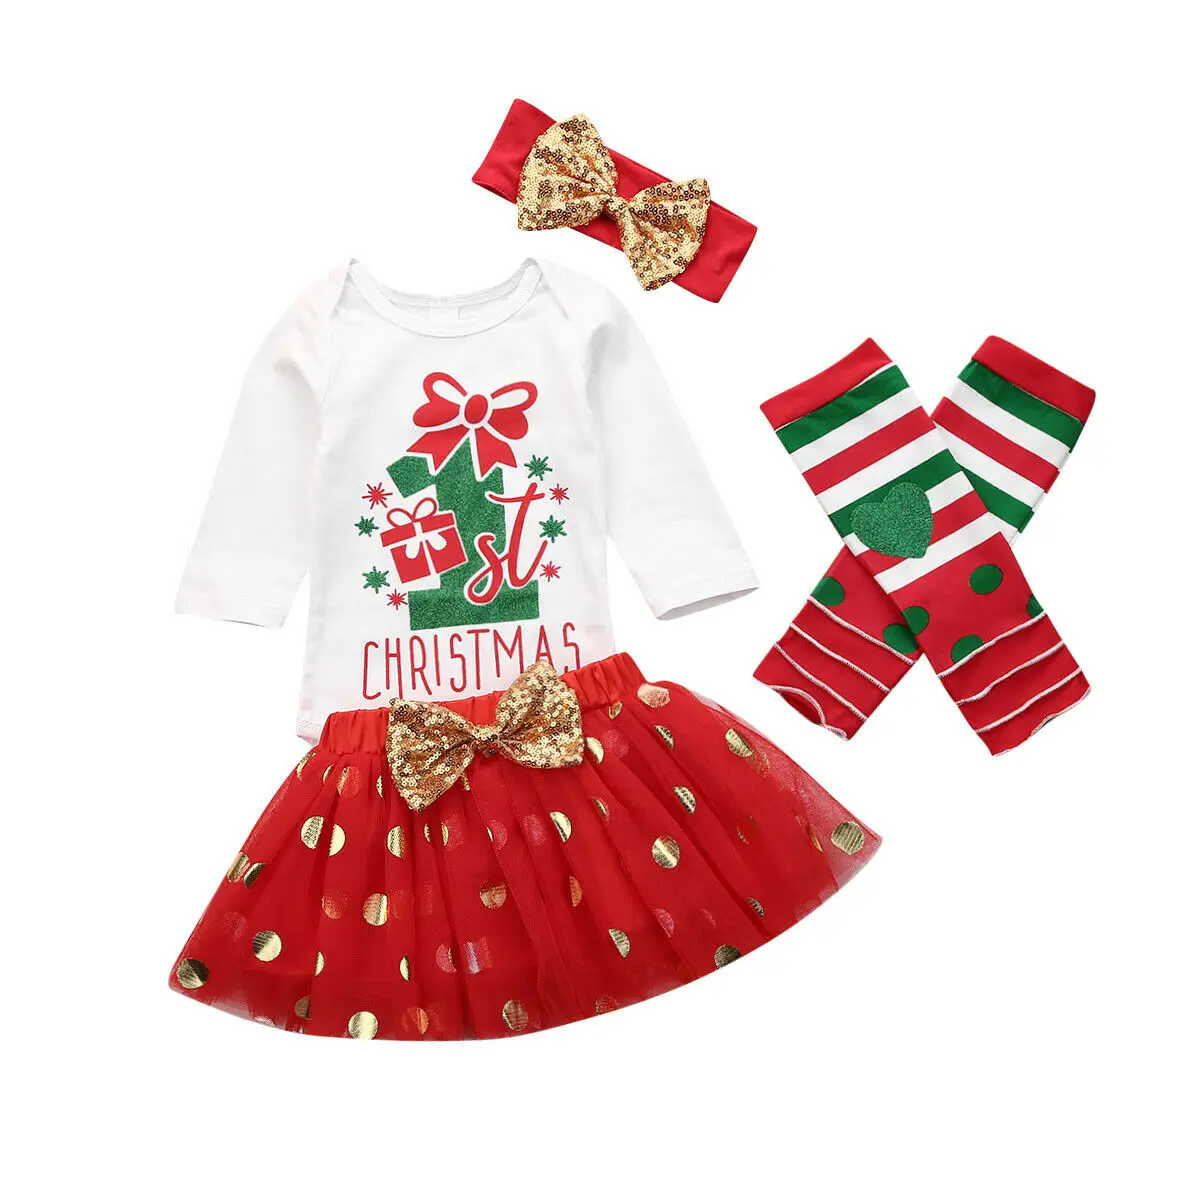 

0-18M My 1st Christmas Baby Girl Clothing Set Newborn Infant Girl Letter Romper Tutu Skirt Leg Warmers Outfits Xmas Clothes